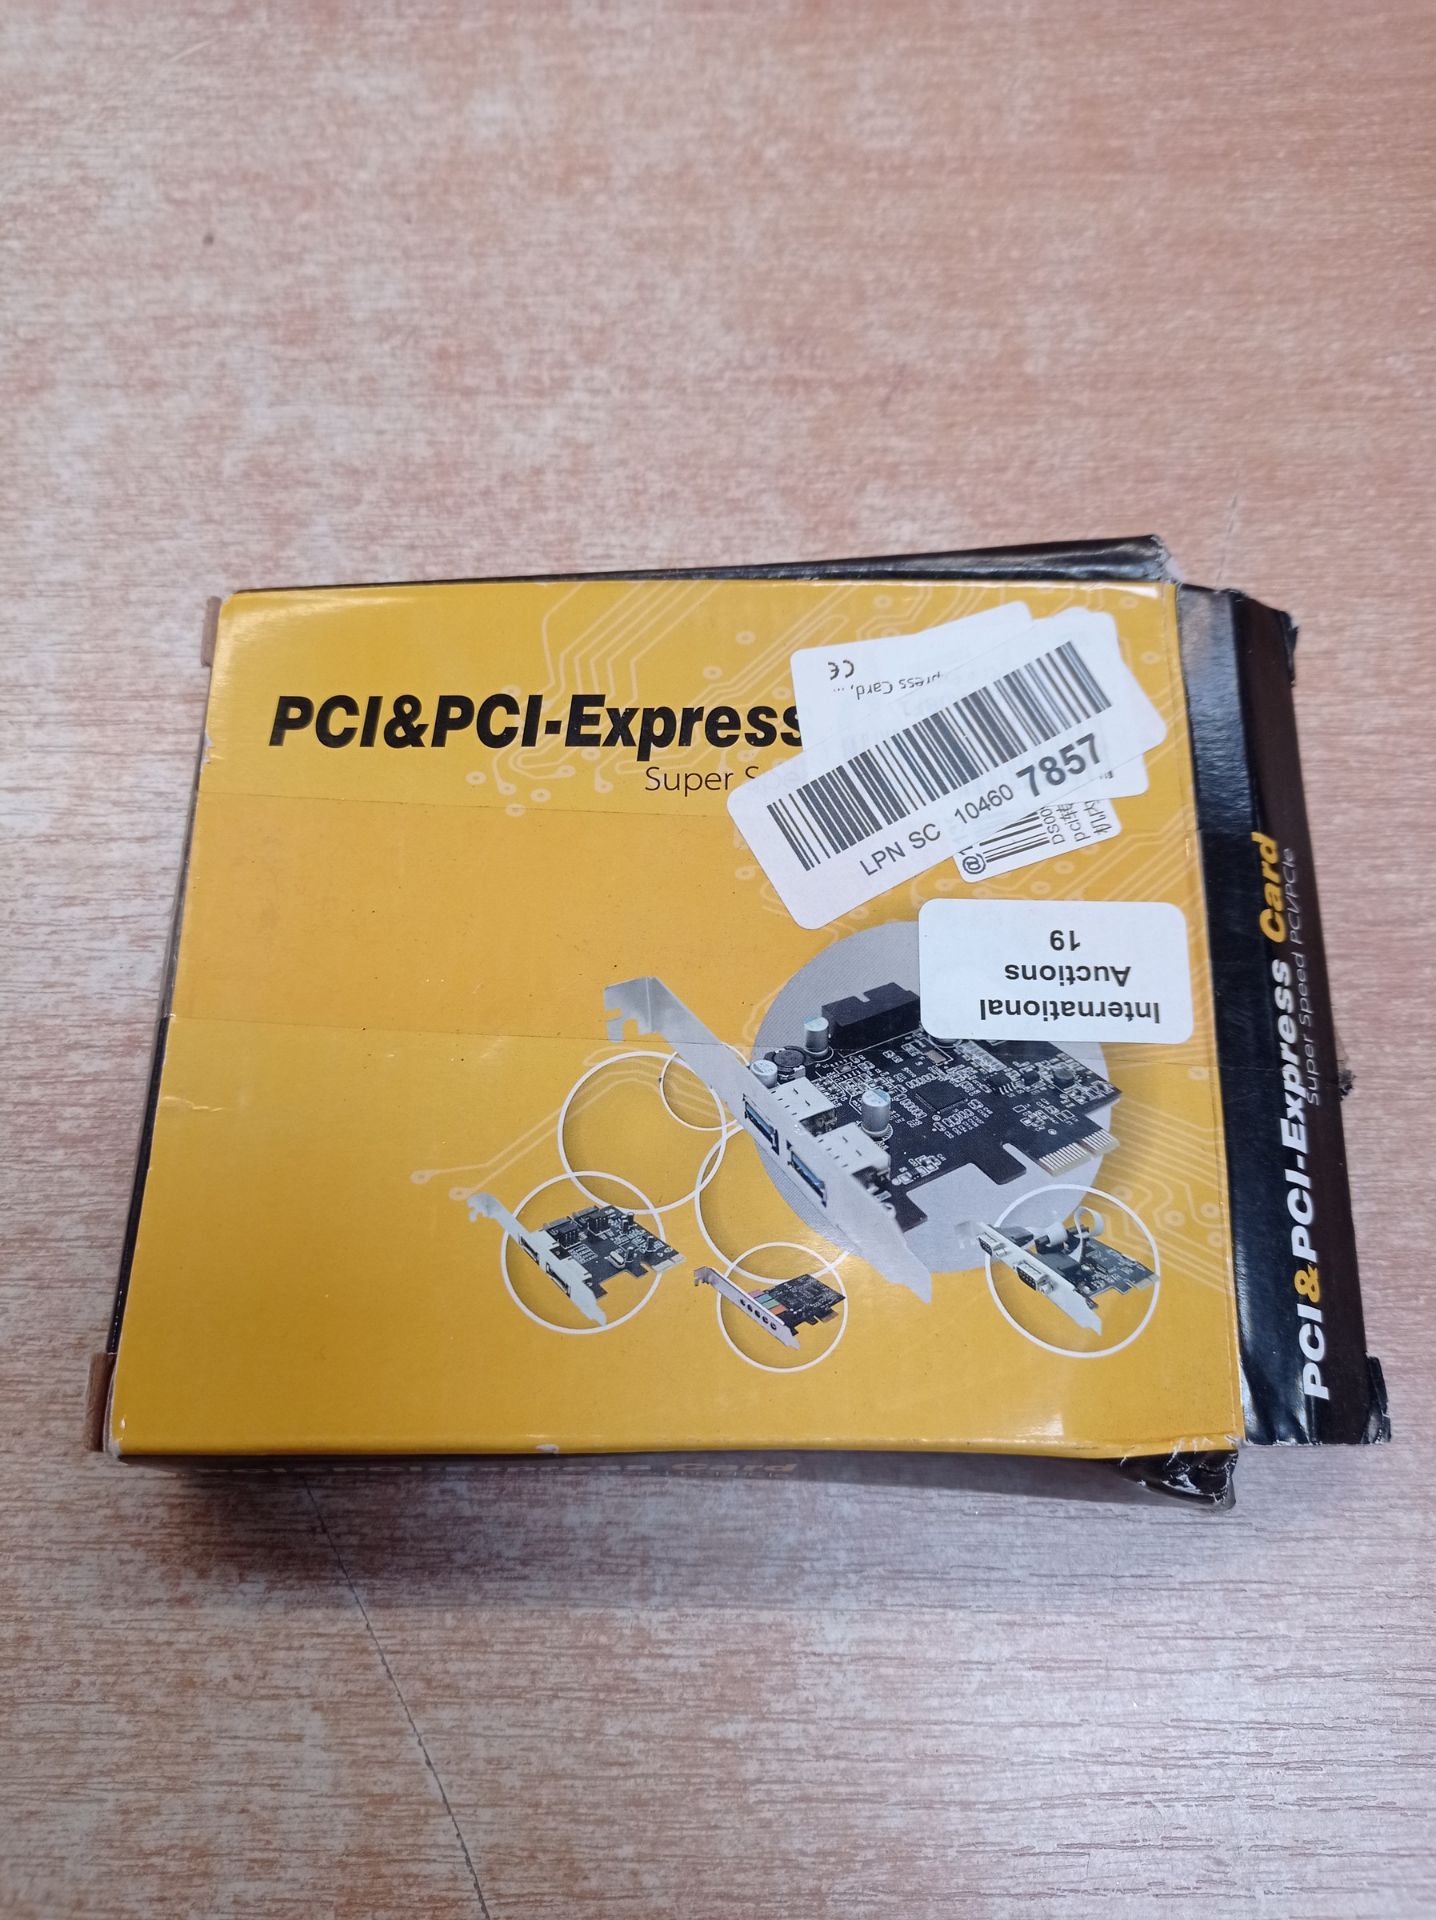 RRP £21.19 800Mbps PCI-E Express Card - Image 2 of 2